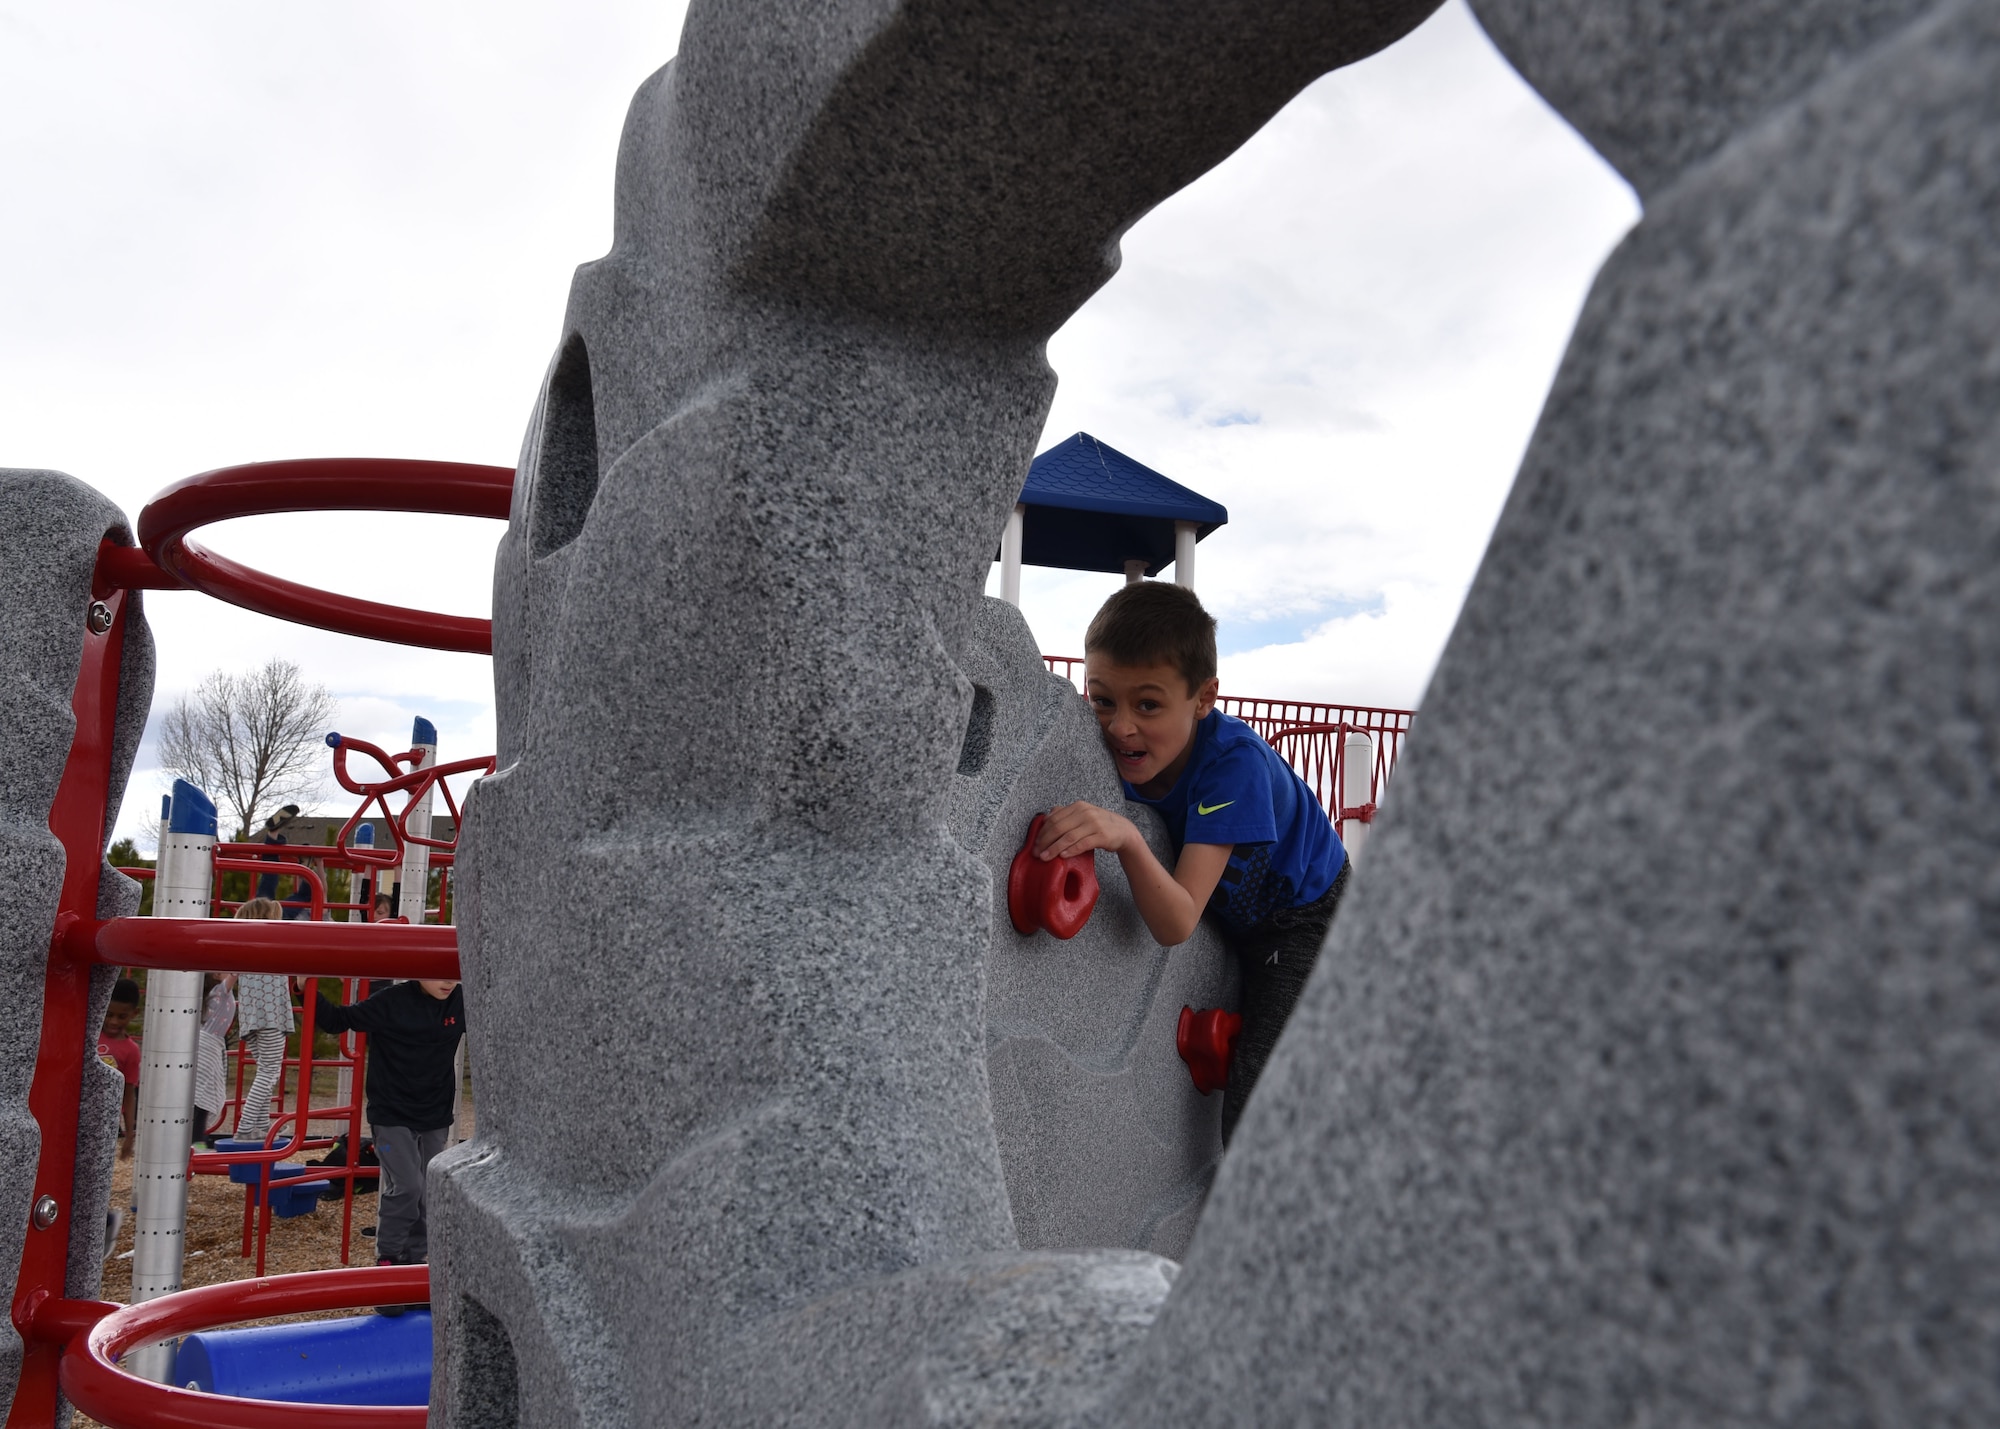 Reagan plays on a rock wall during recess, April 15, 2019, in Cheyenne, Wyo. Since 9/11, more than two million children have had a parent deploy, the moth of the military child is used as a time to recognize the difficulties kids face during those times. (U.S. Air Force photo by Airman 1st Class Braydon Williams)